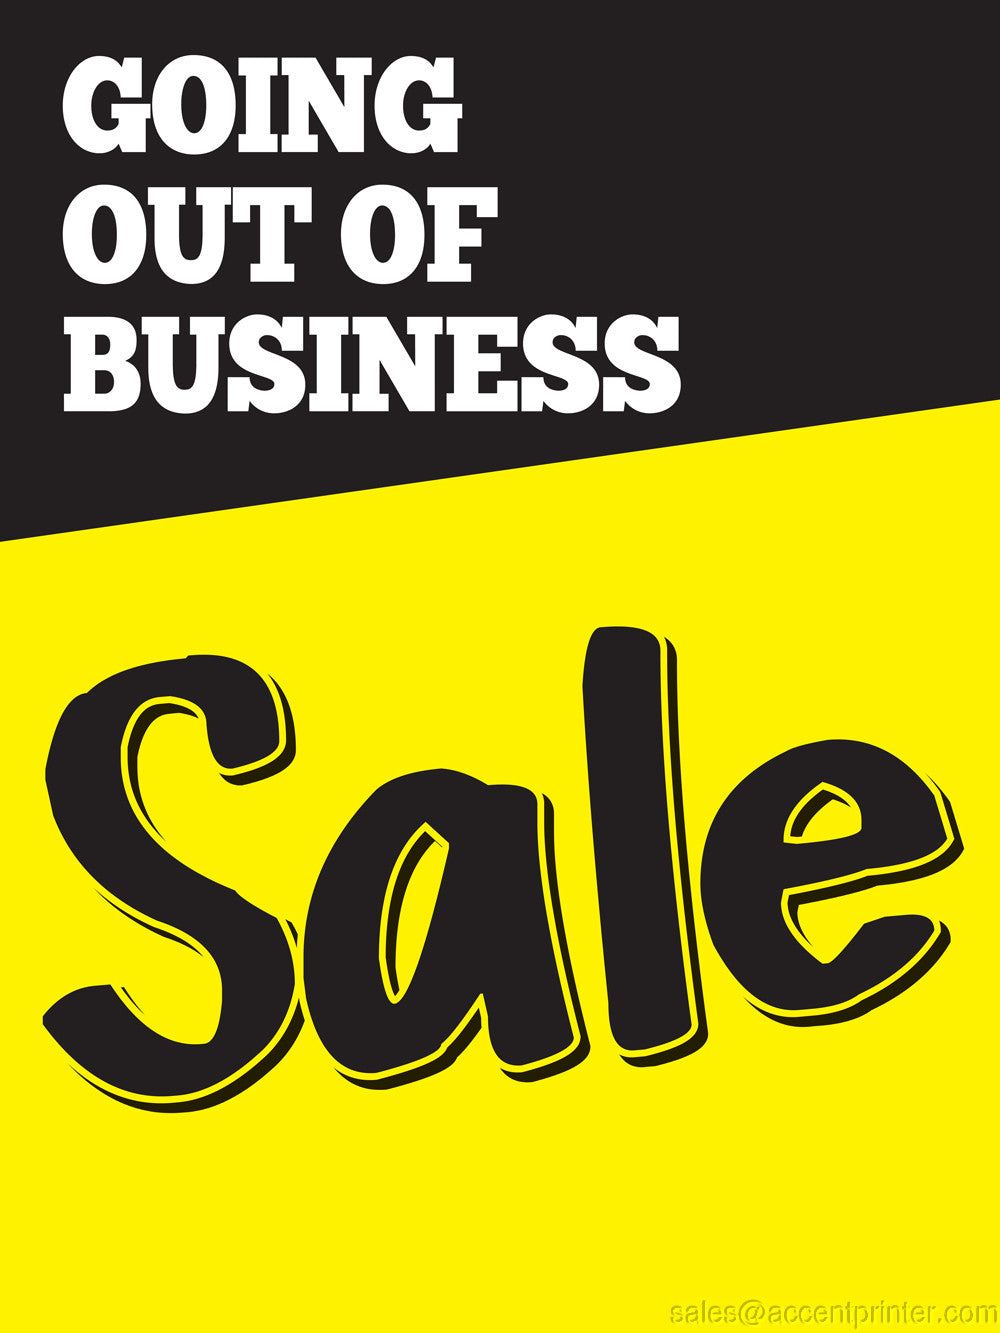 Going Out of Business Sale Retail Display Sign, 18"w x 24"h, Full Colo